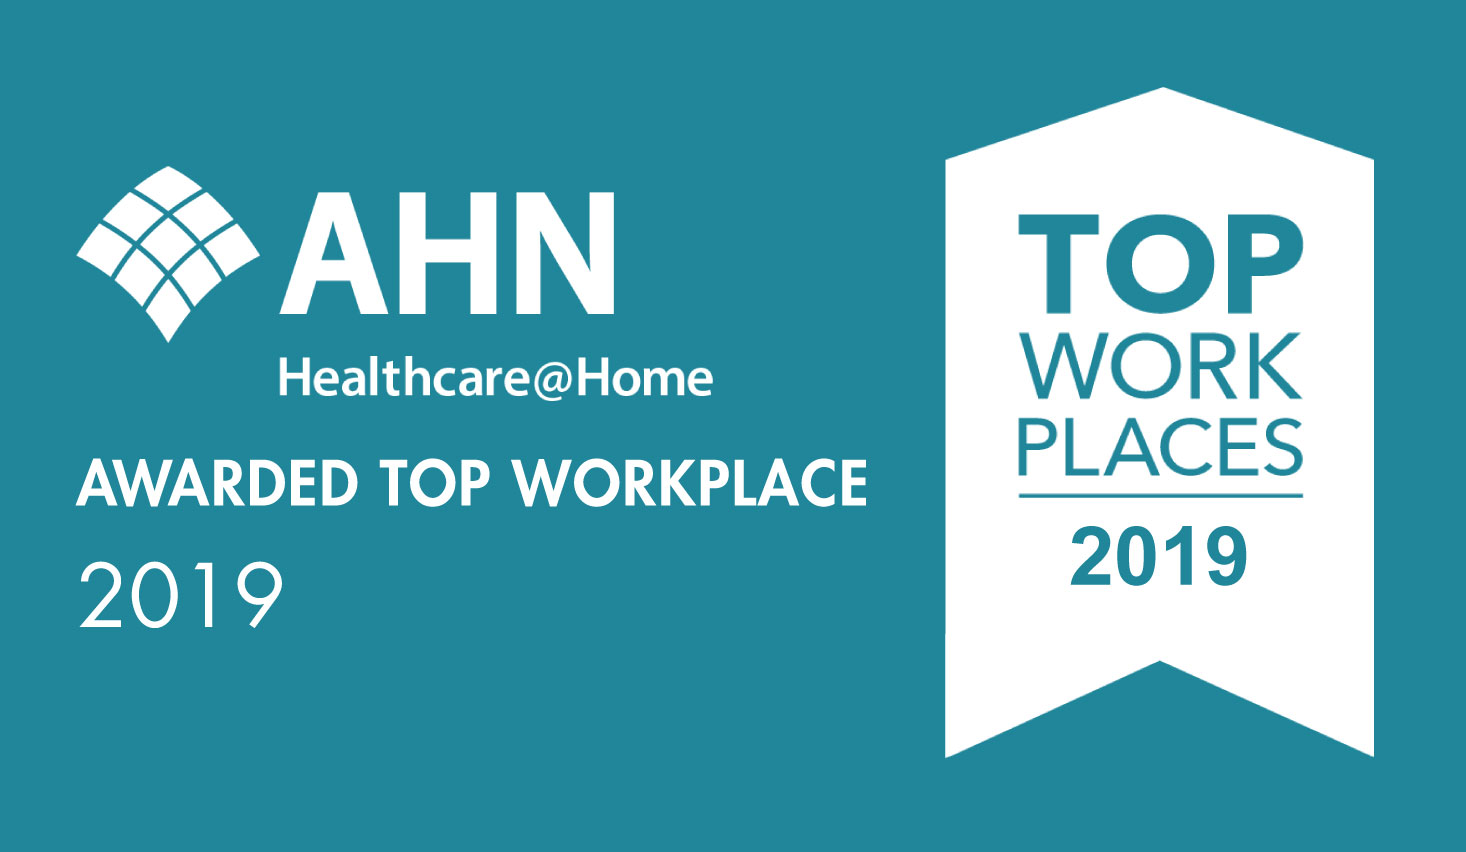 AHN Healthcare@Home Top Workplace